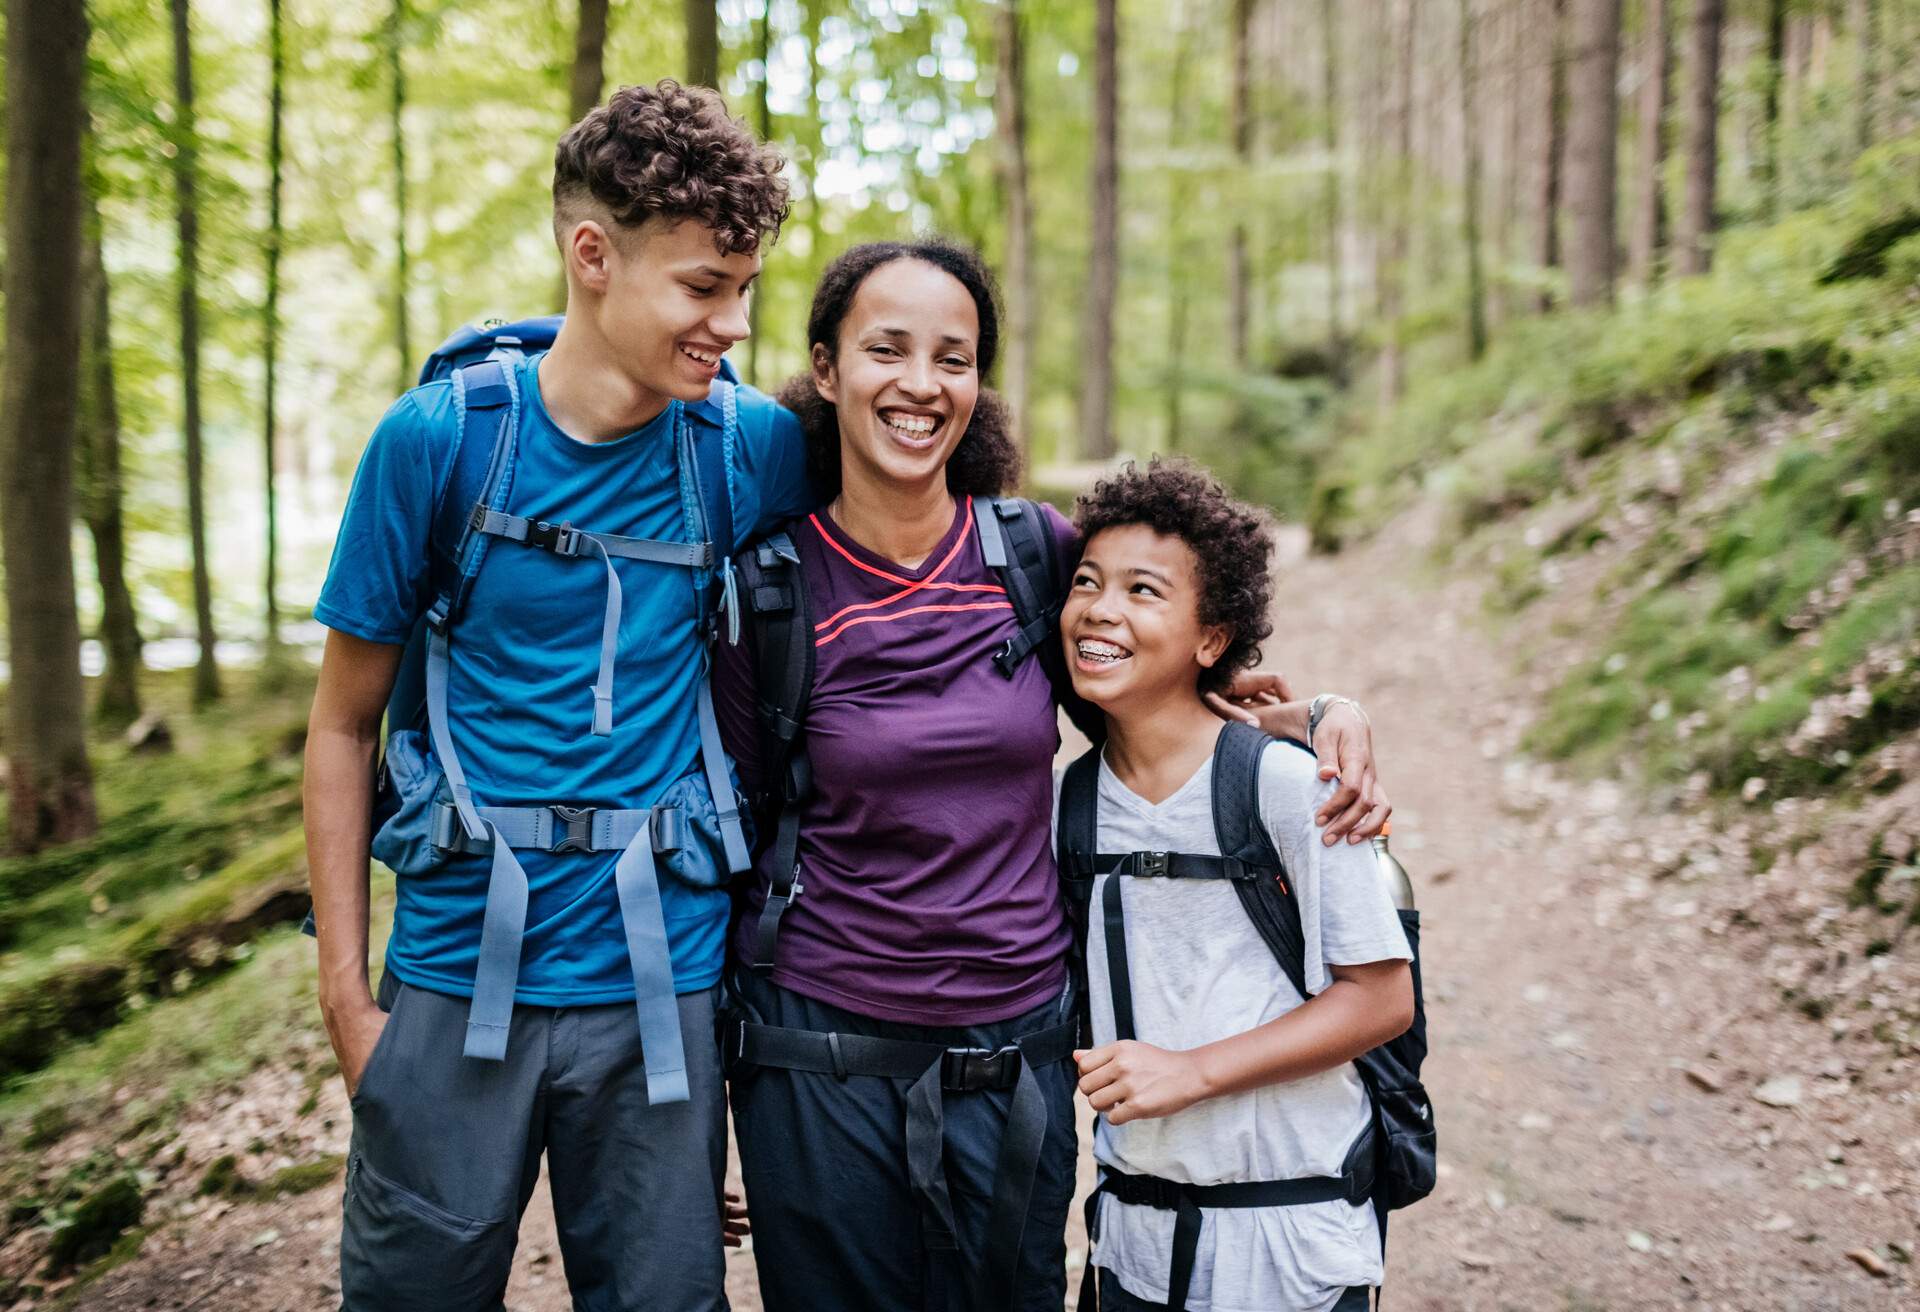 A family of three hugging while out hiking a woodland trail together.